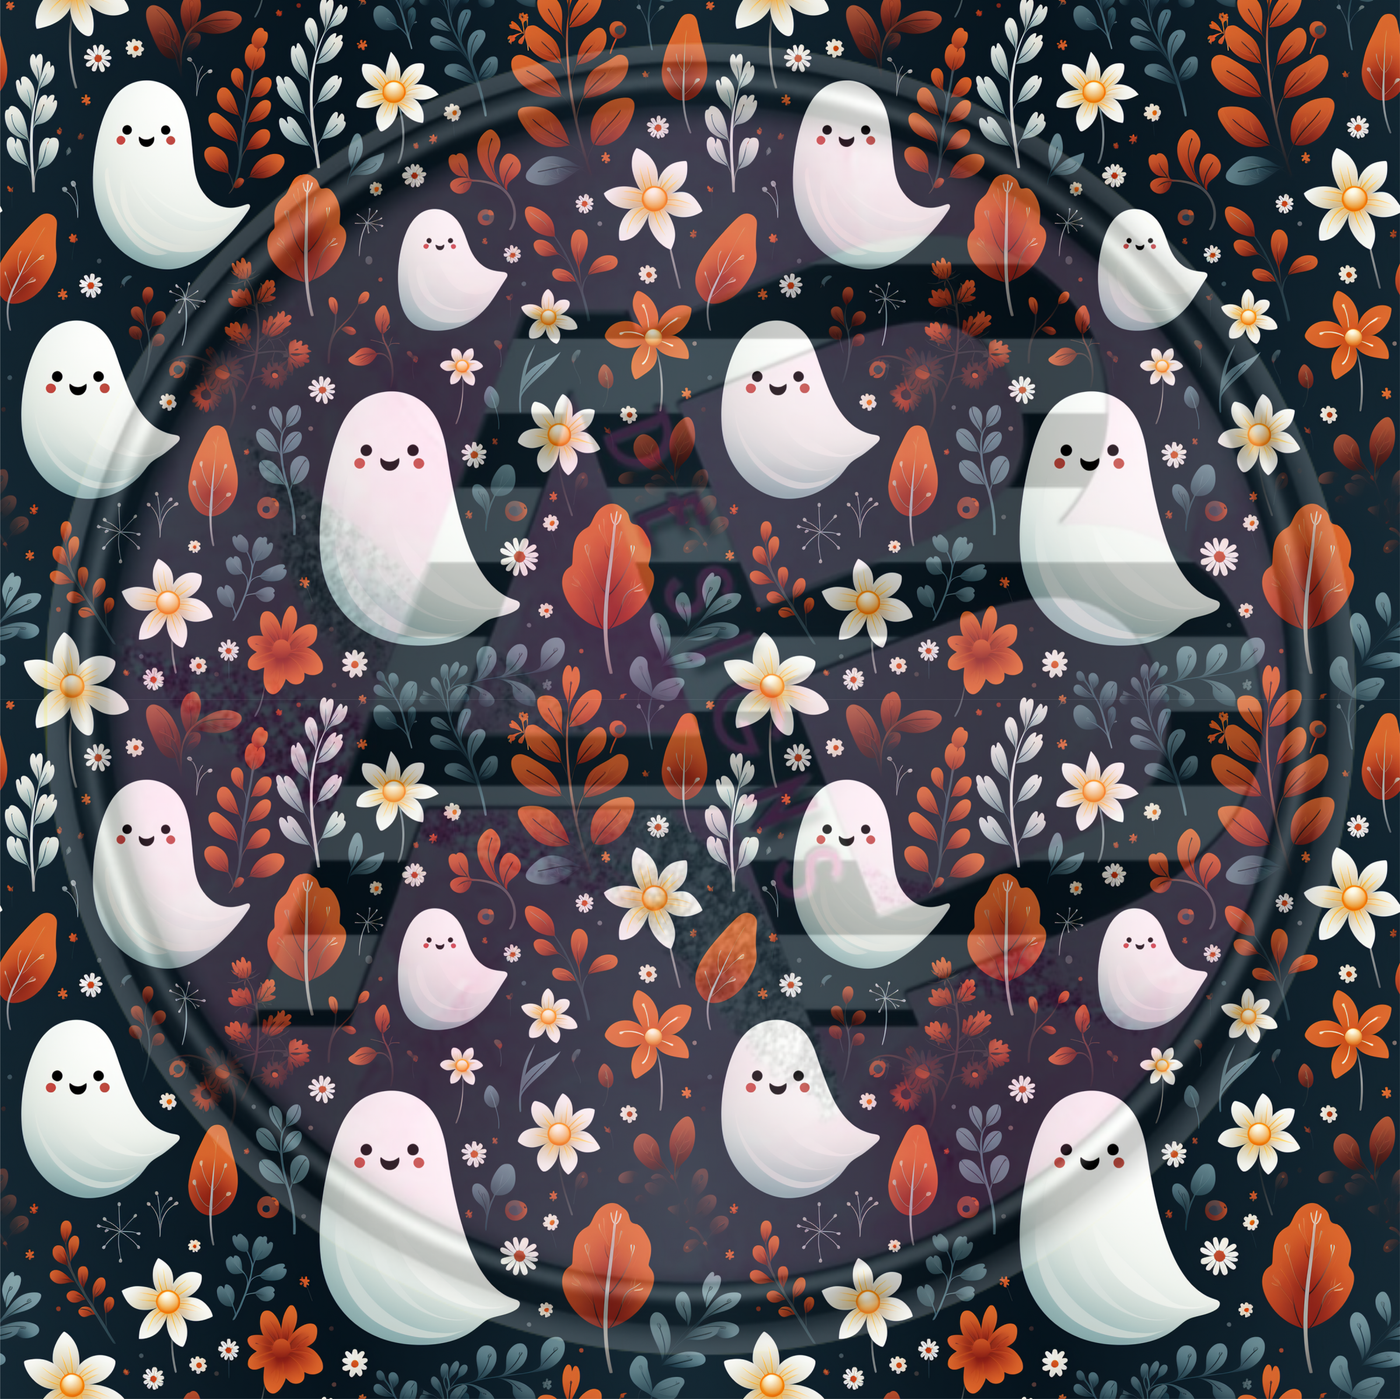 Adhesive Patterned Vinyl - Ghost 12 Smaller